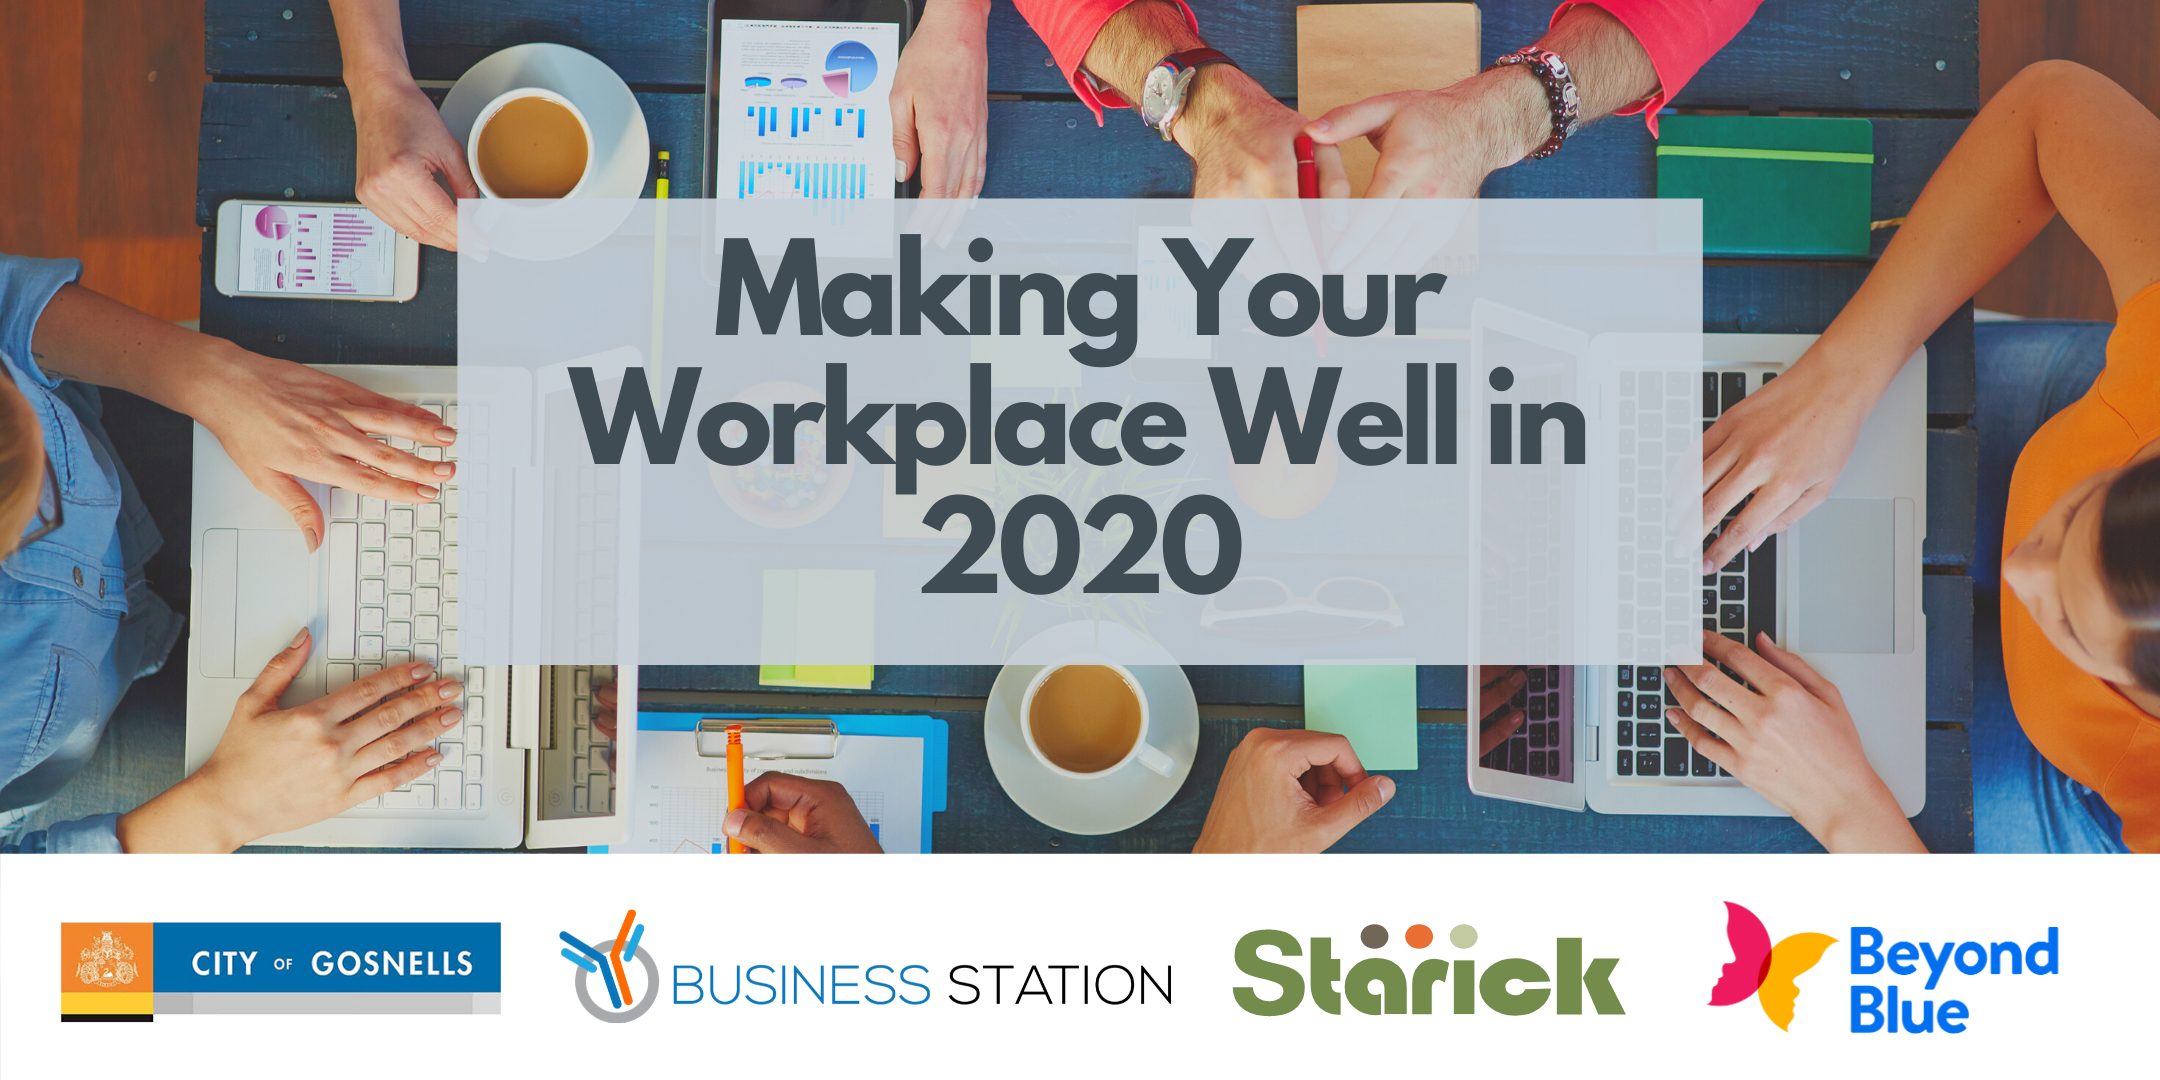 Making Your Workplace Well in 2020